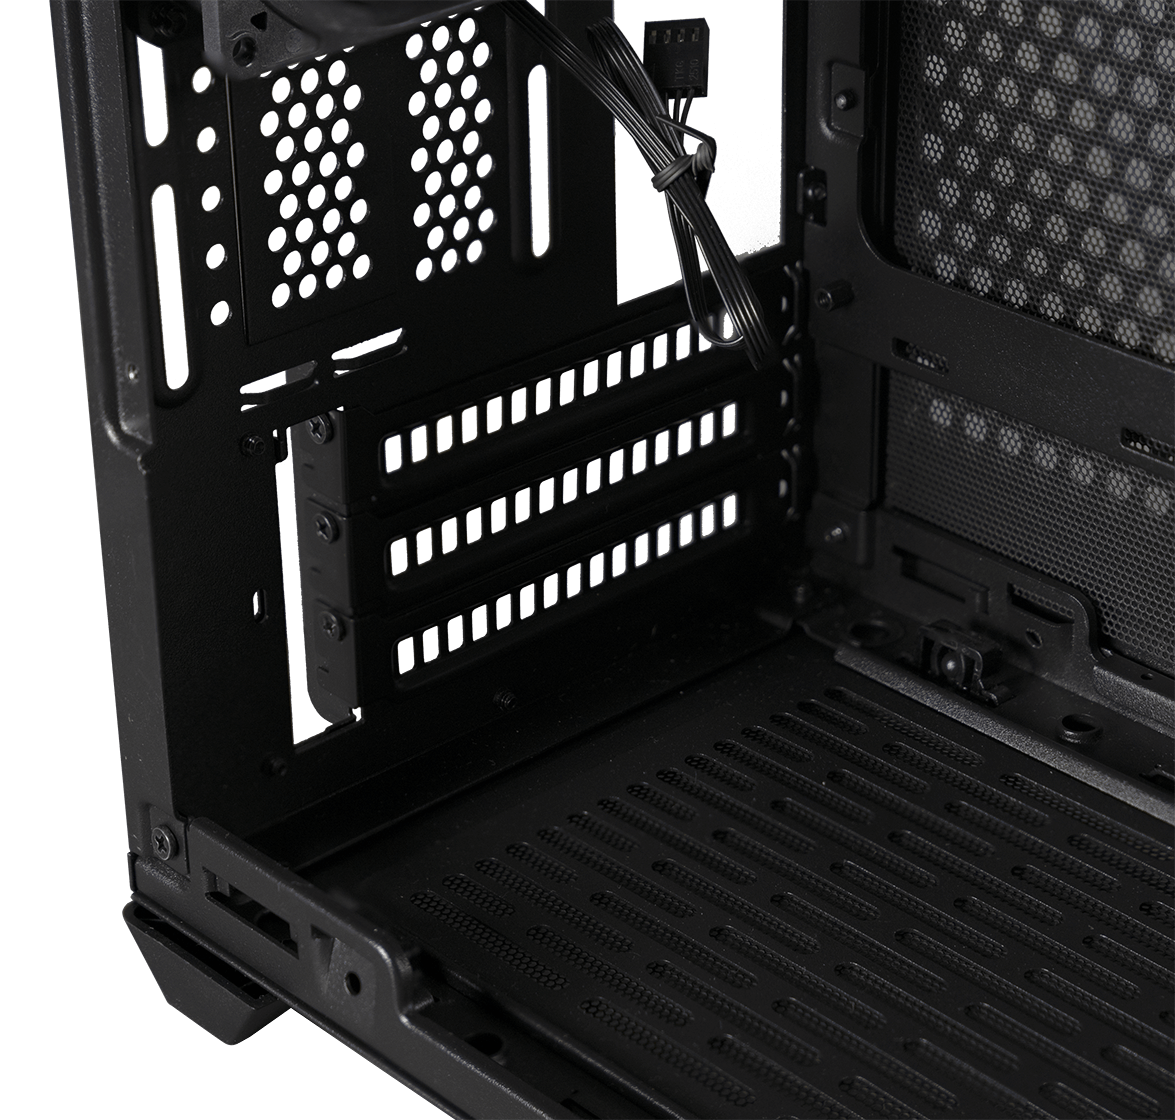 A Blank Slate For Extreme Customization On A Budget – A Review Of The  Cooler Master MasterBox 5 – Techgage